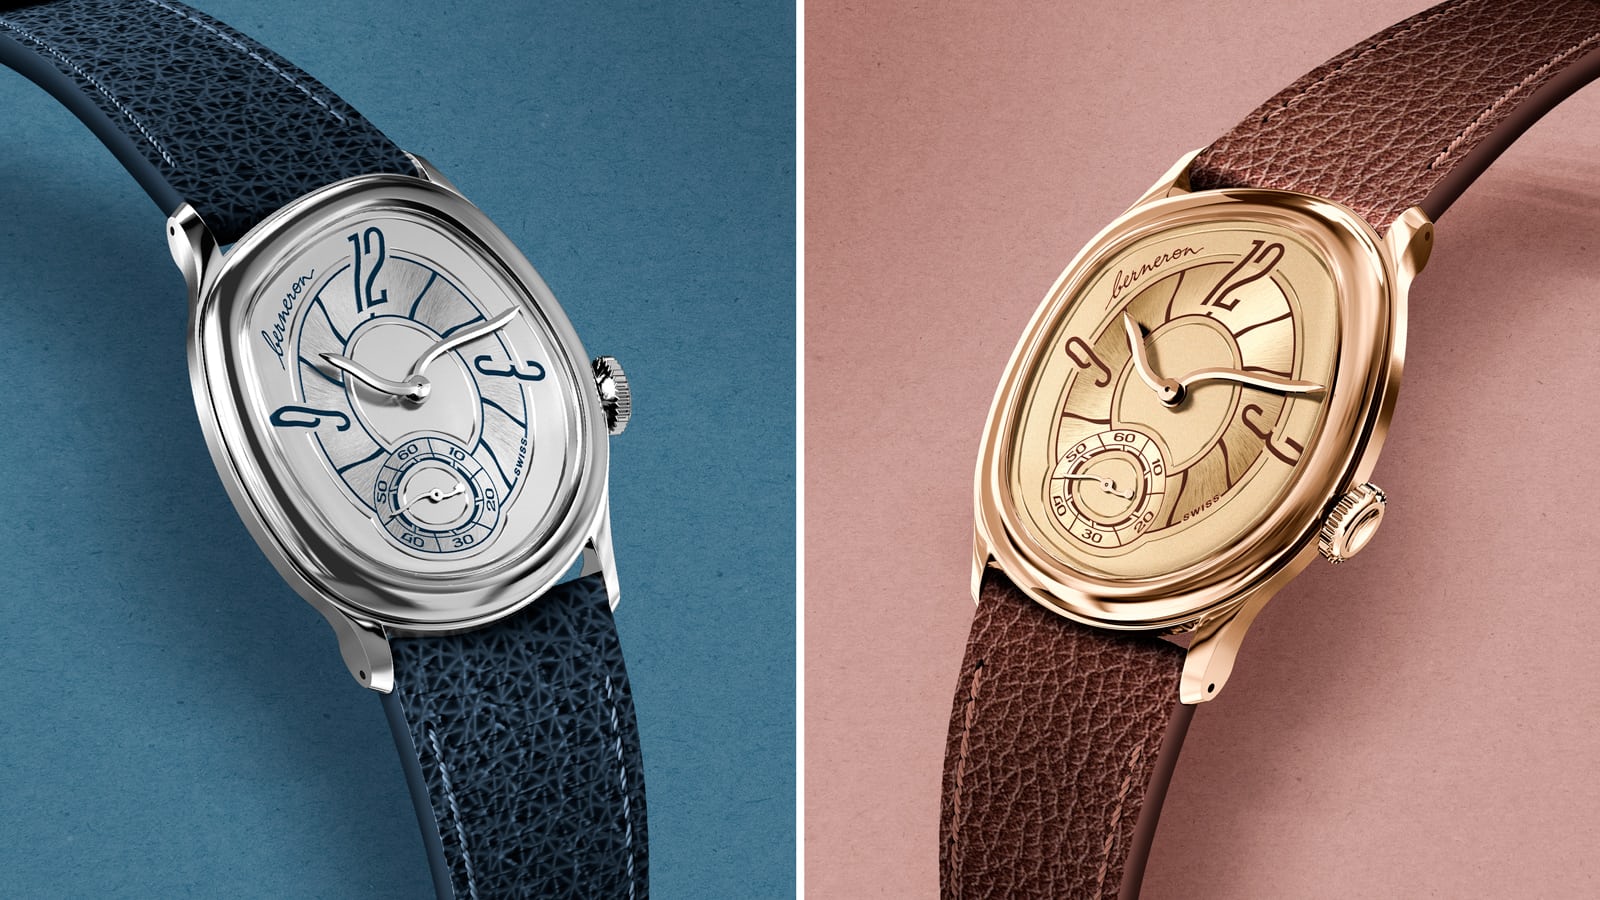 Louis Vuitton reveals an astonishing one-off timepiece that takes